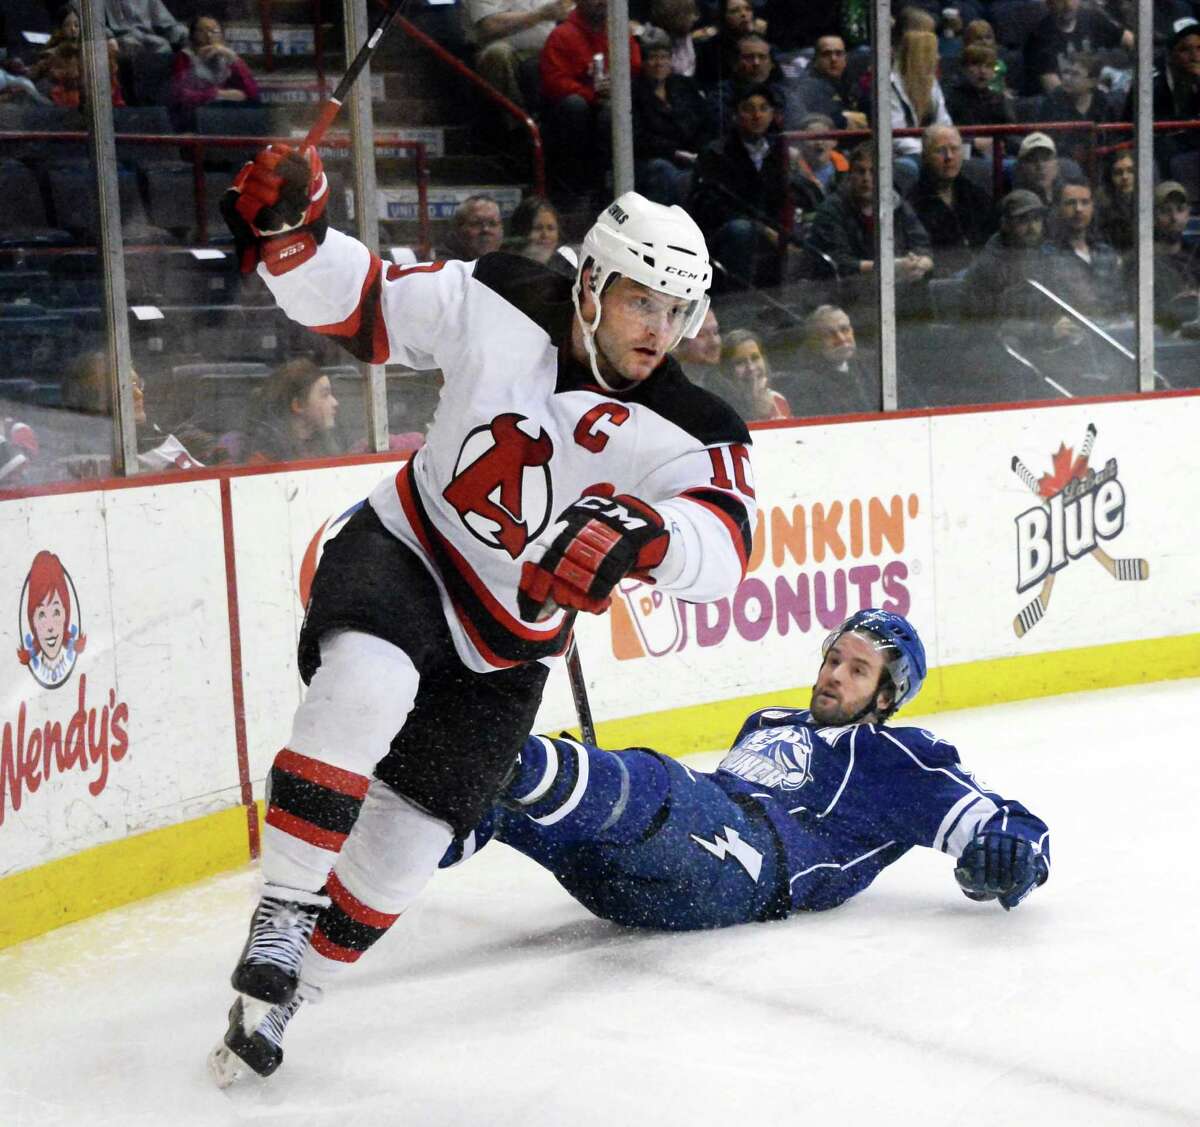 Albany Devils's # 10 Rod Pelley, left, skates away after hard check to Syracuse Crunch's #24 Jean-Philippe Cote during Saturday's game at the Times Union Center March 14, 2015 in Albany, NY. (John Carl D'Annibale / Times Union)